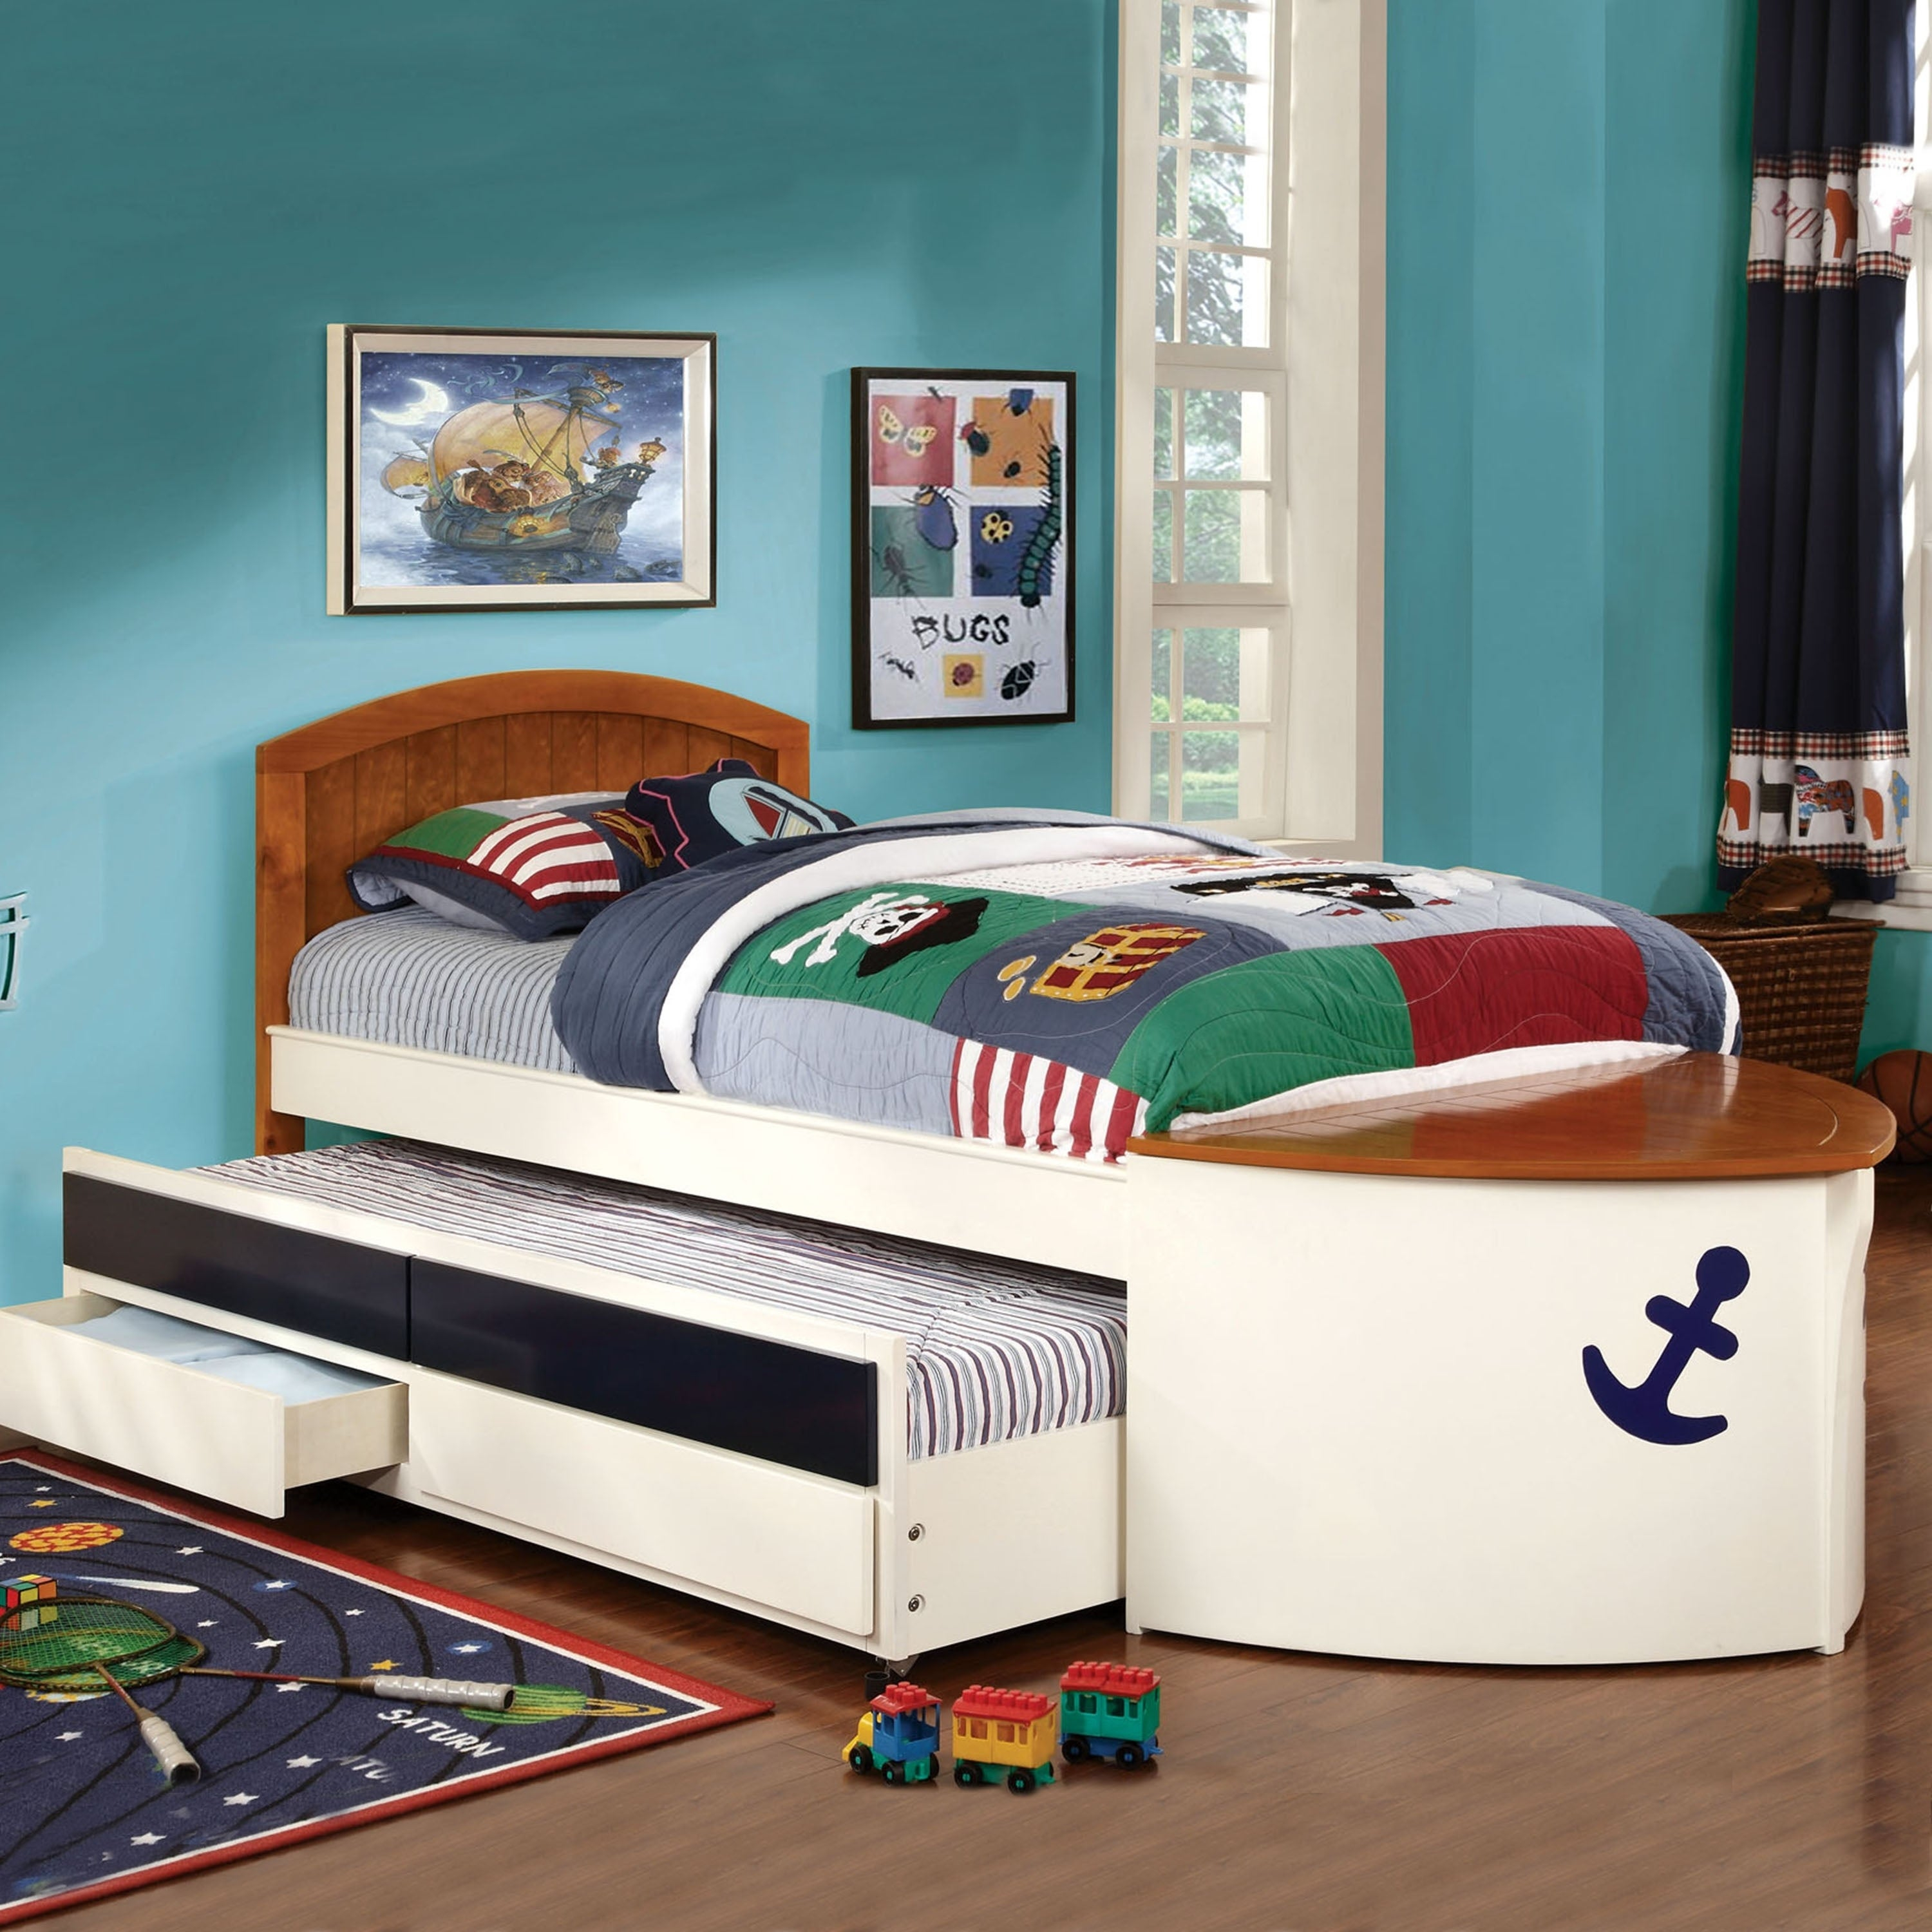 Furniture Of America Capitaine Boat Twin Bed With Trundle And Storage throughout proportions 3000 X 3000